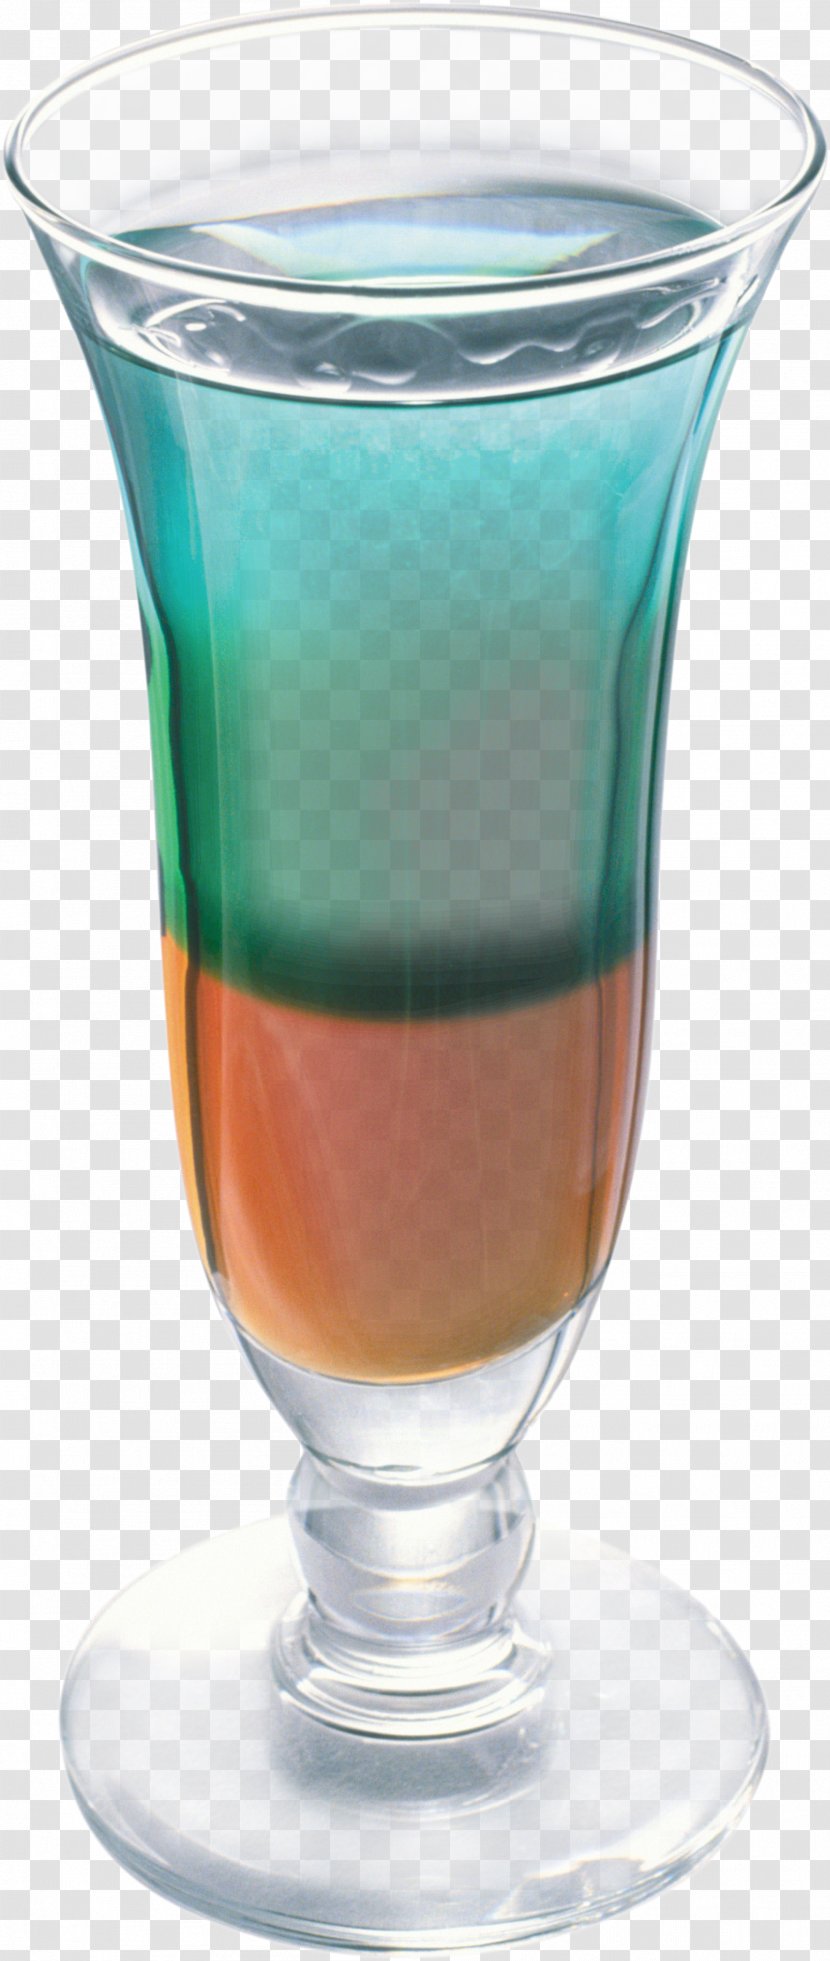 Cocktail Glass Blue Lagoon Juice Wine - Drinkware Transparent PNG